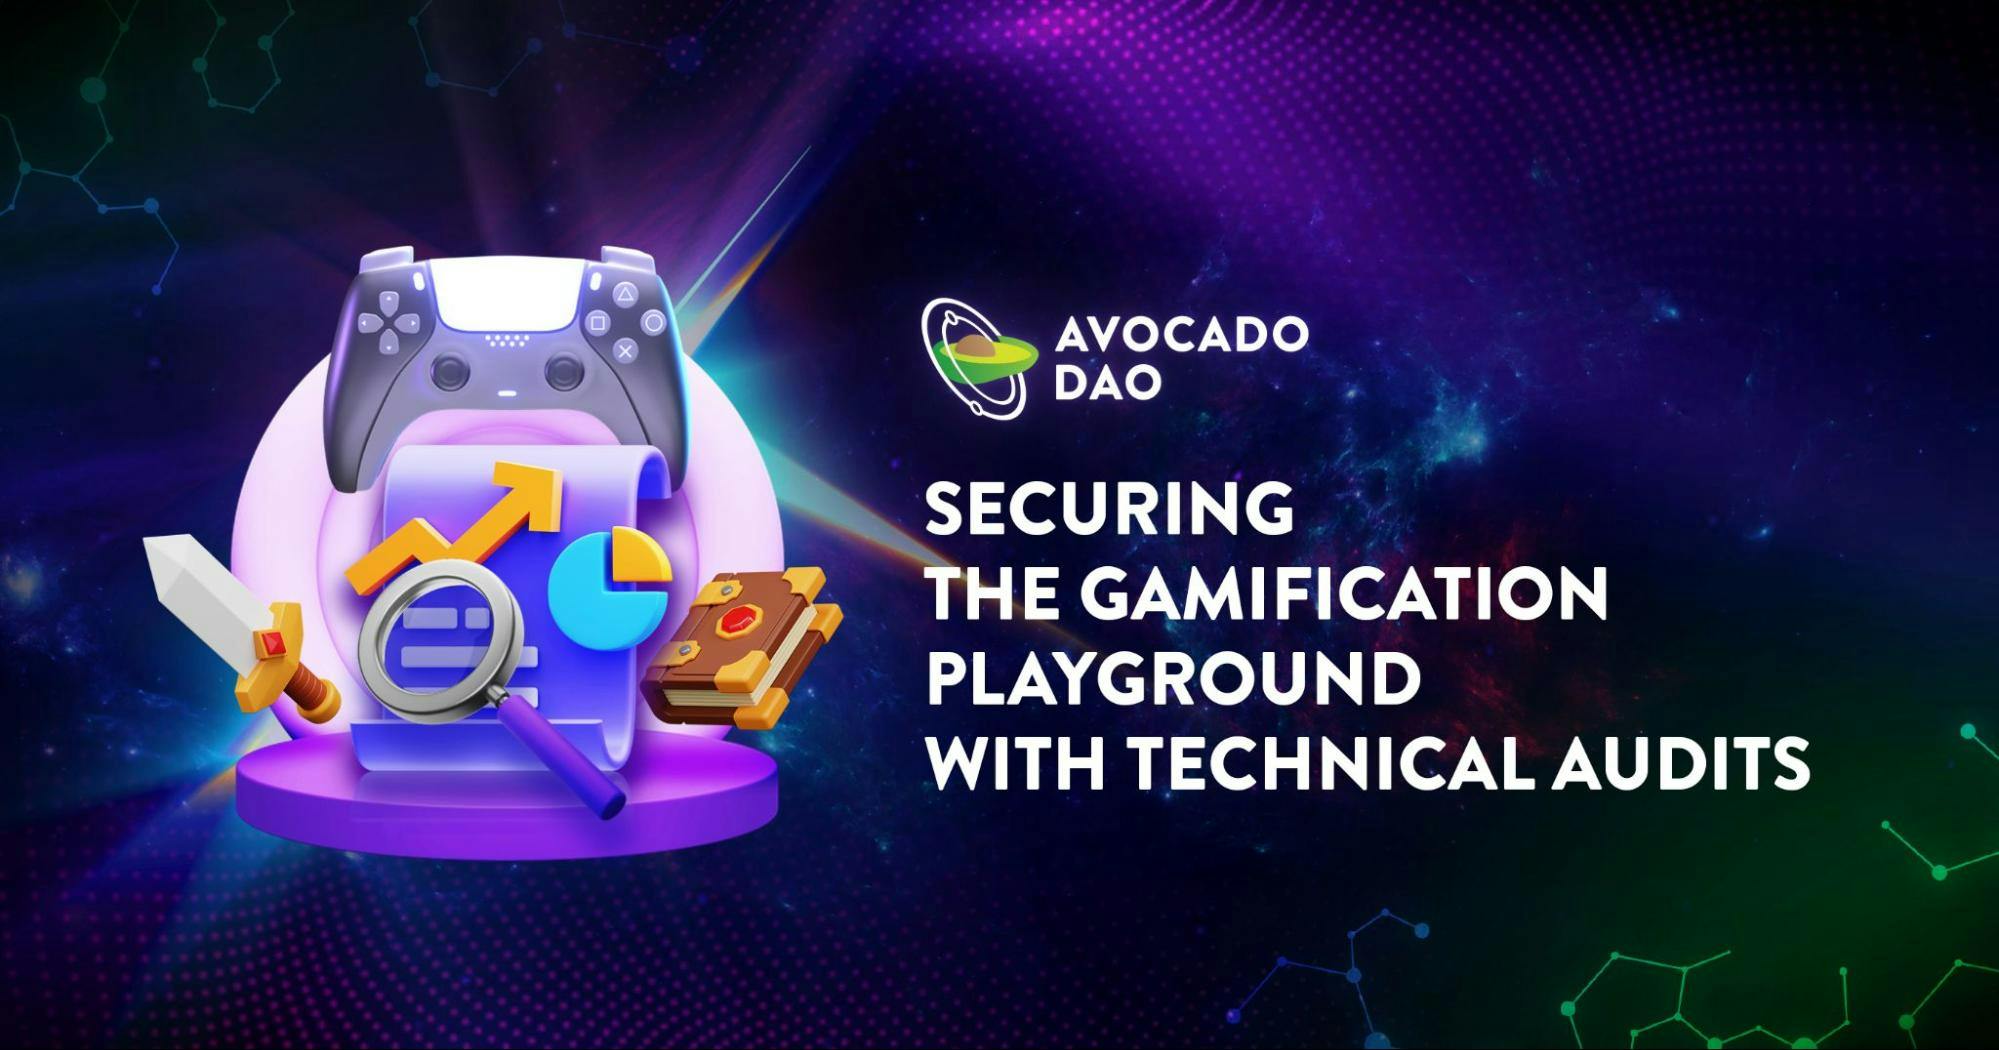 Securing the gamification playground with technical audits